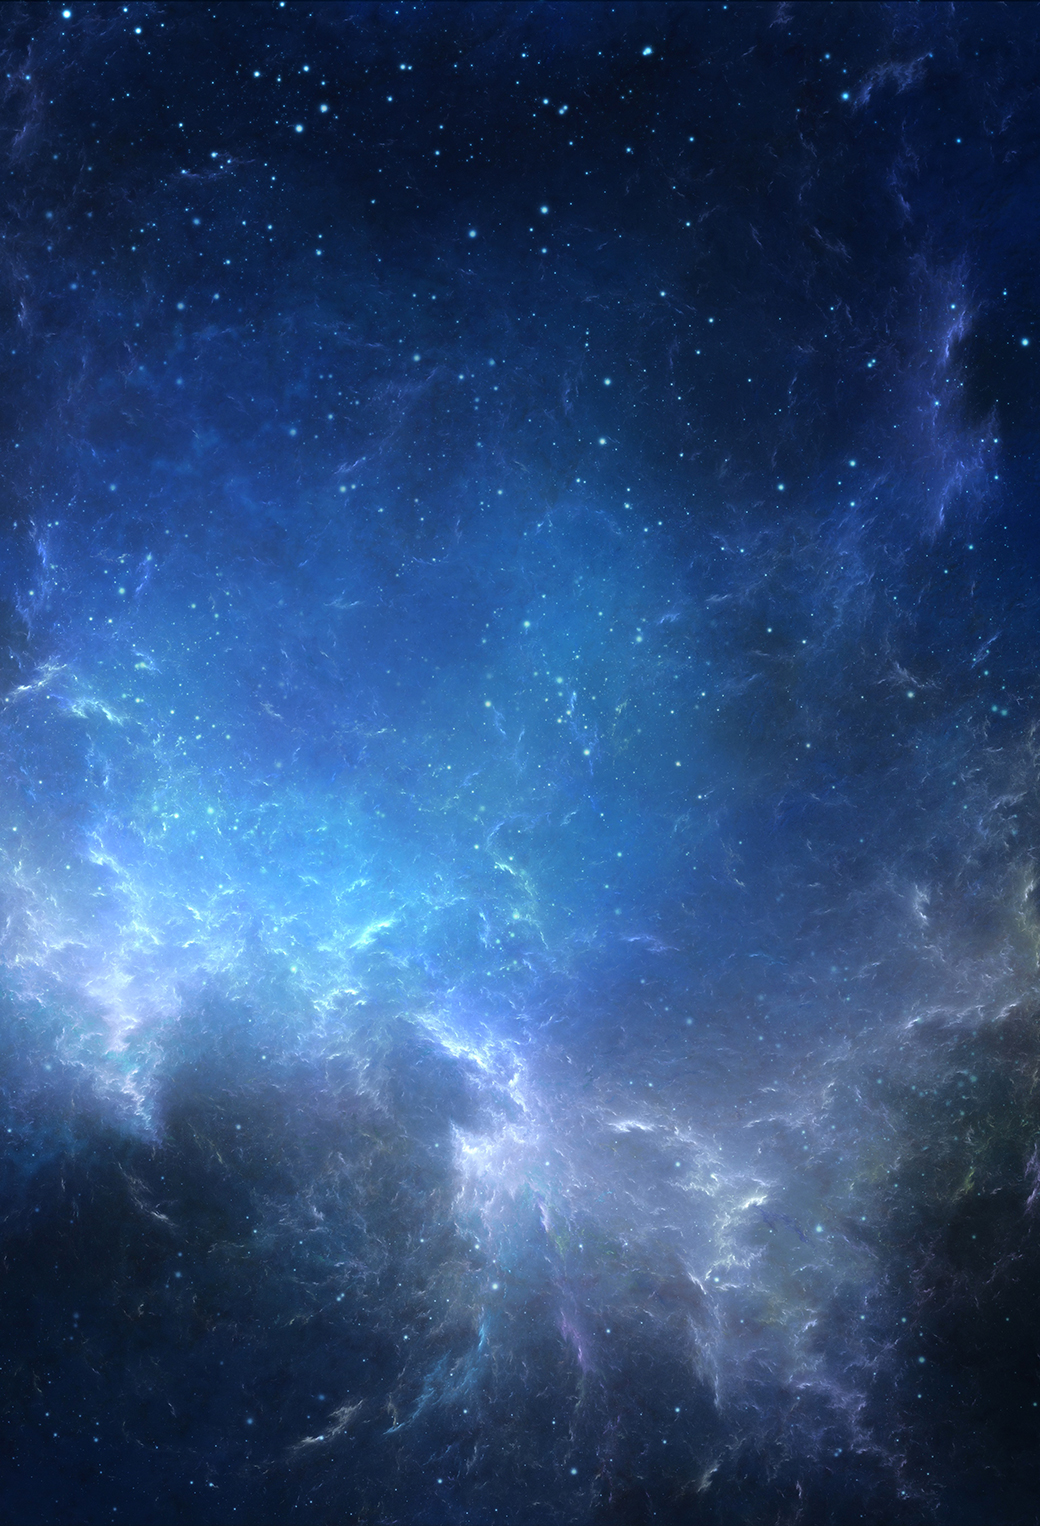 Blue Space 3Wallpapers iphone Retina Les 3 Wallpapers iPhone du jour